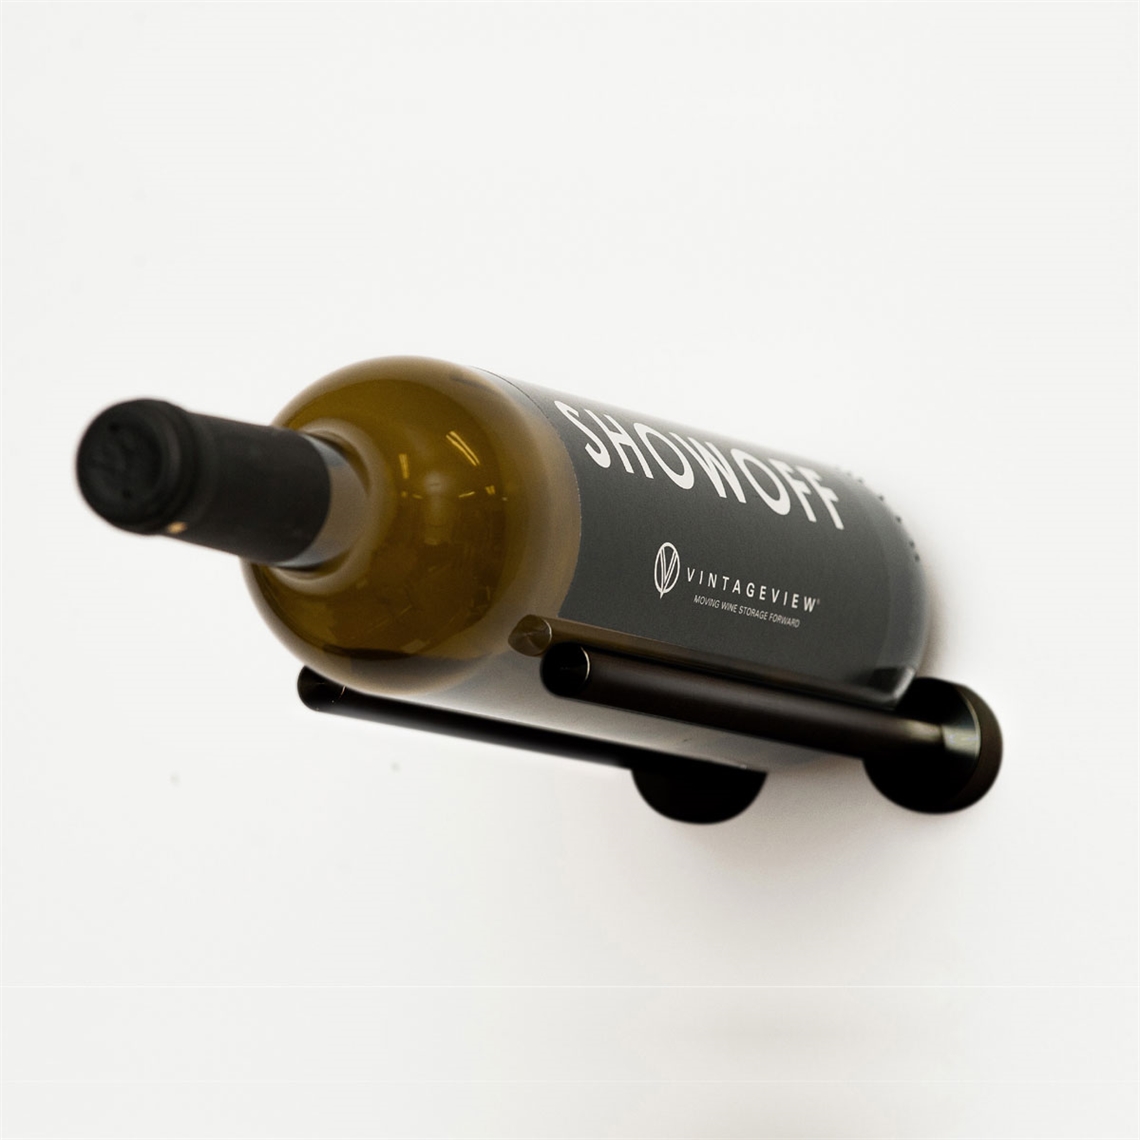 View more wine racks from our Wall Mounted Wine Racks range